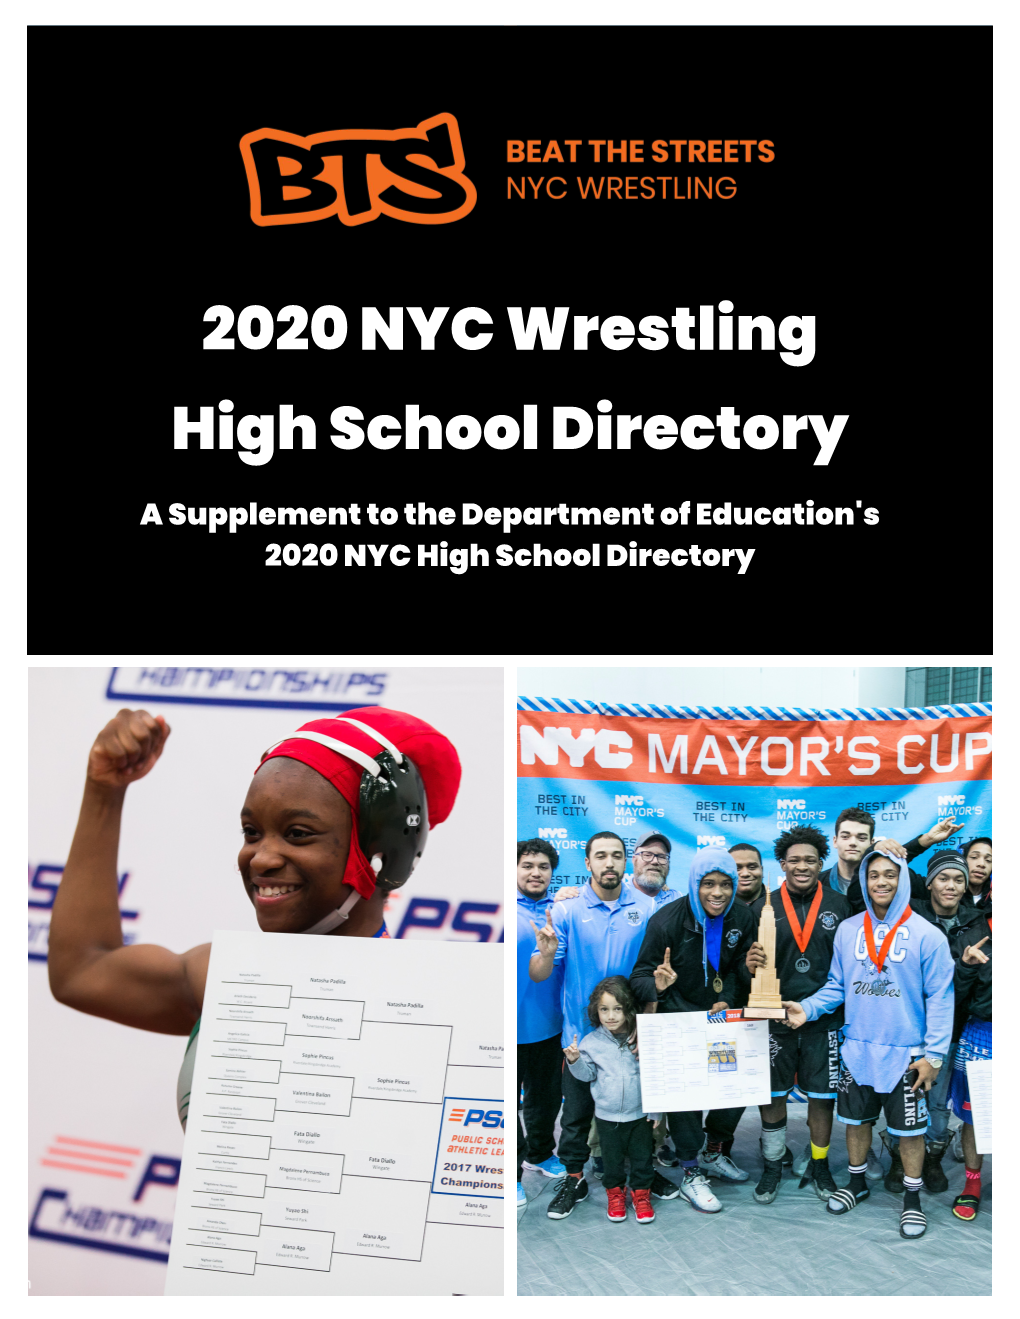 2020 NYC Wrestling High School Directory a Supplement to the Department of Education's 2020 NYC High School Directory